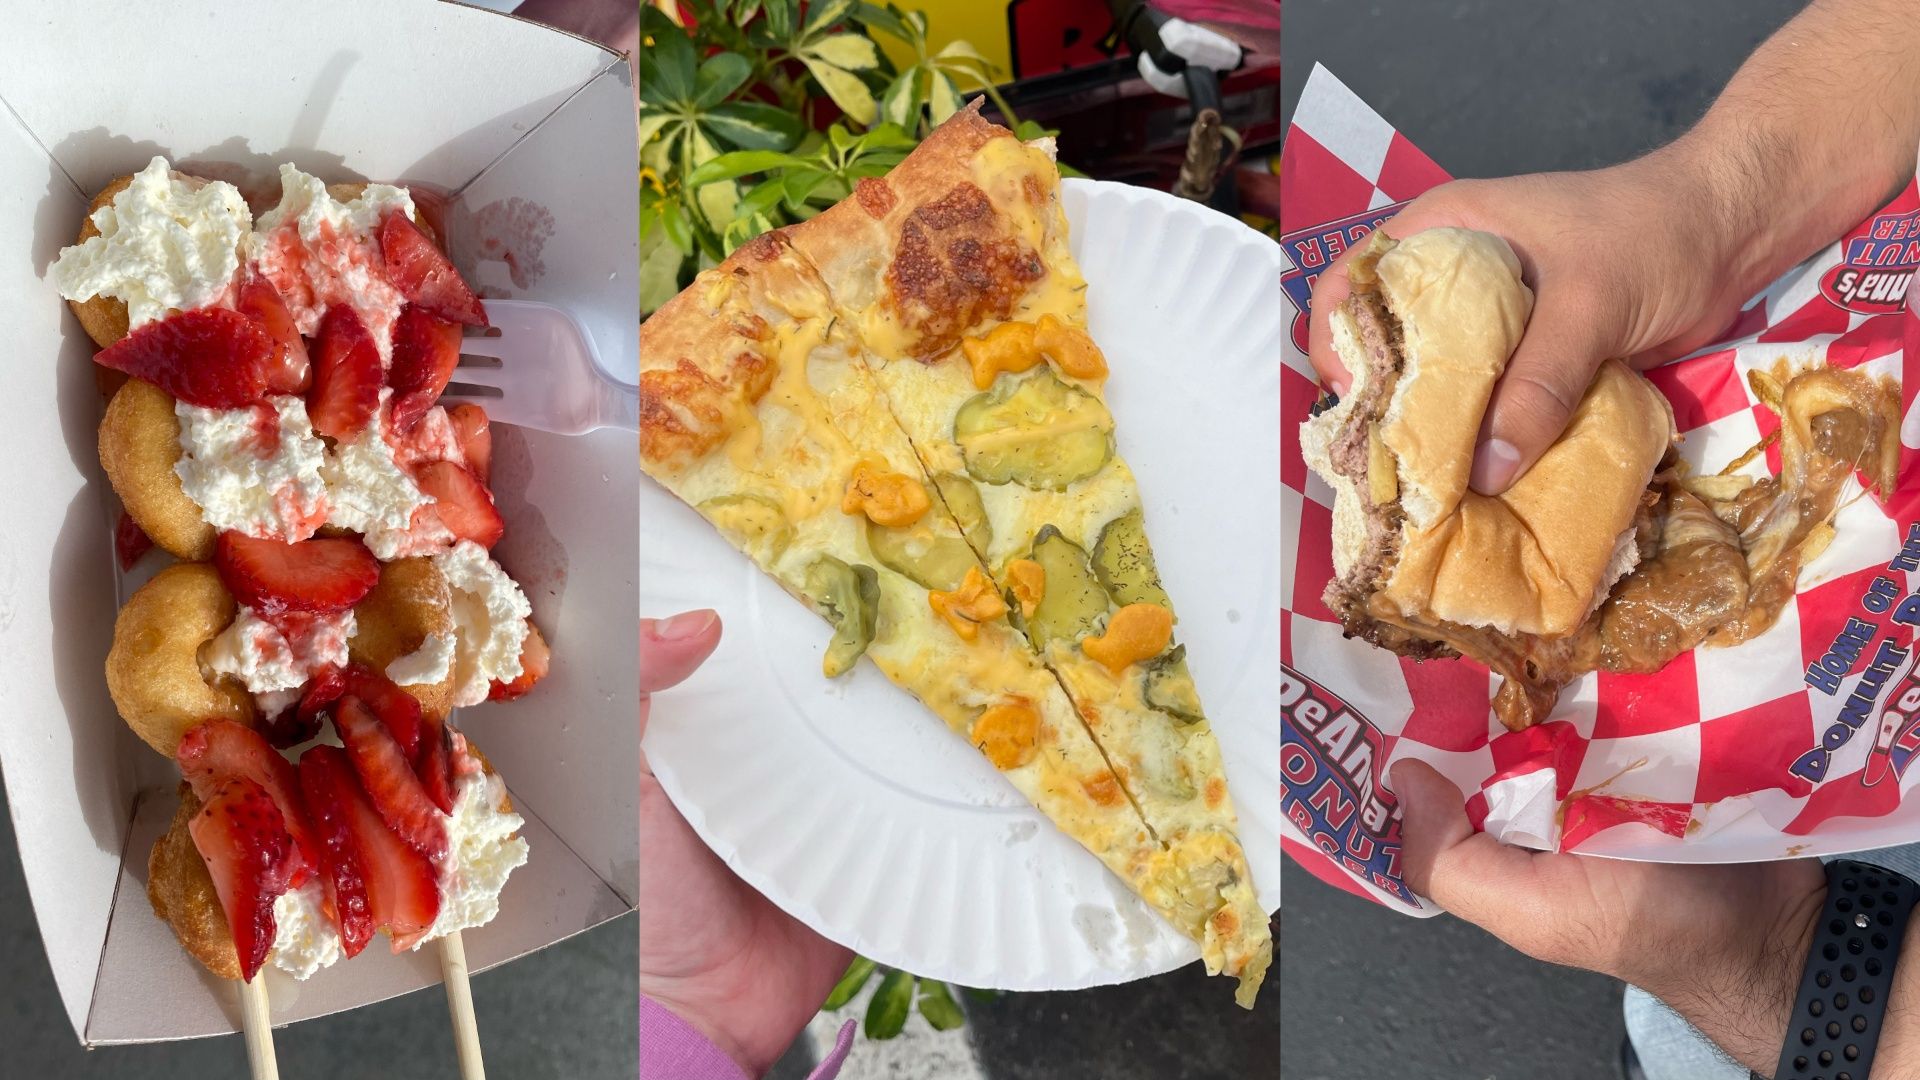 Three photos side-by-side. The right photo shows fried dough topped with whipped cream and strawberries. The second is two slices of pizza topped with pickles and Goldfish crackers. The third is a burger with a brown gravy-like substance using out onto white-and-red checkered paper.